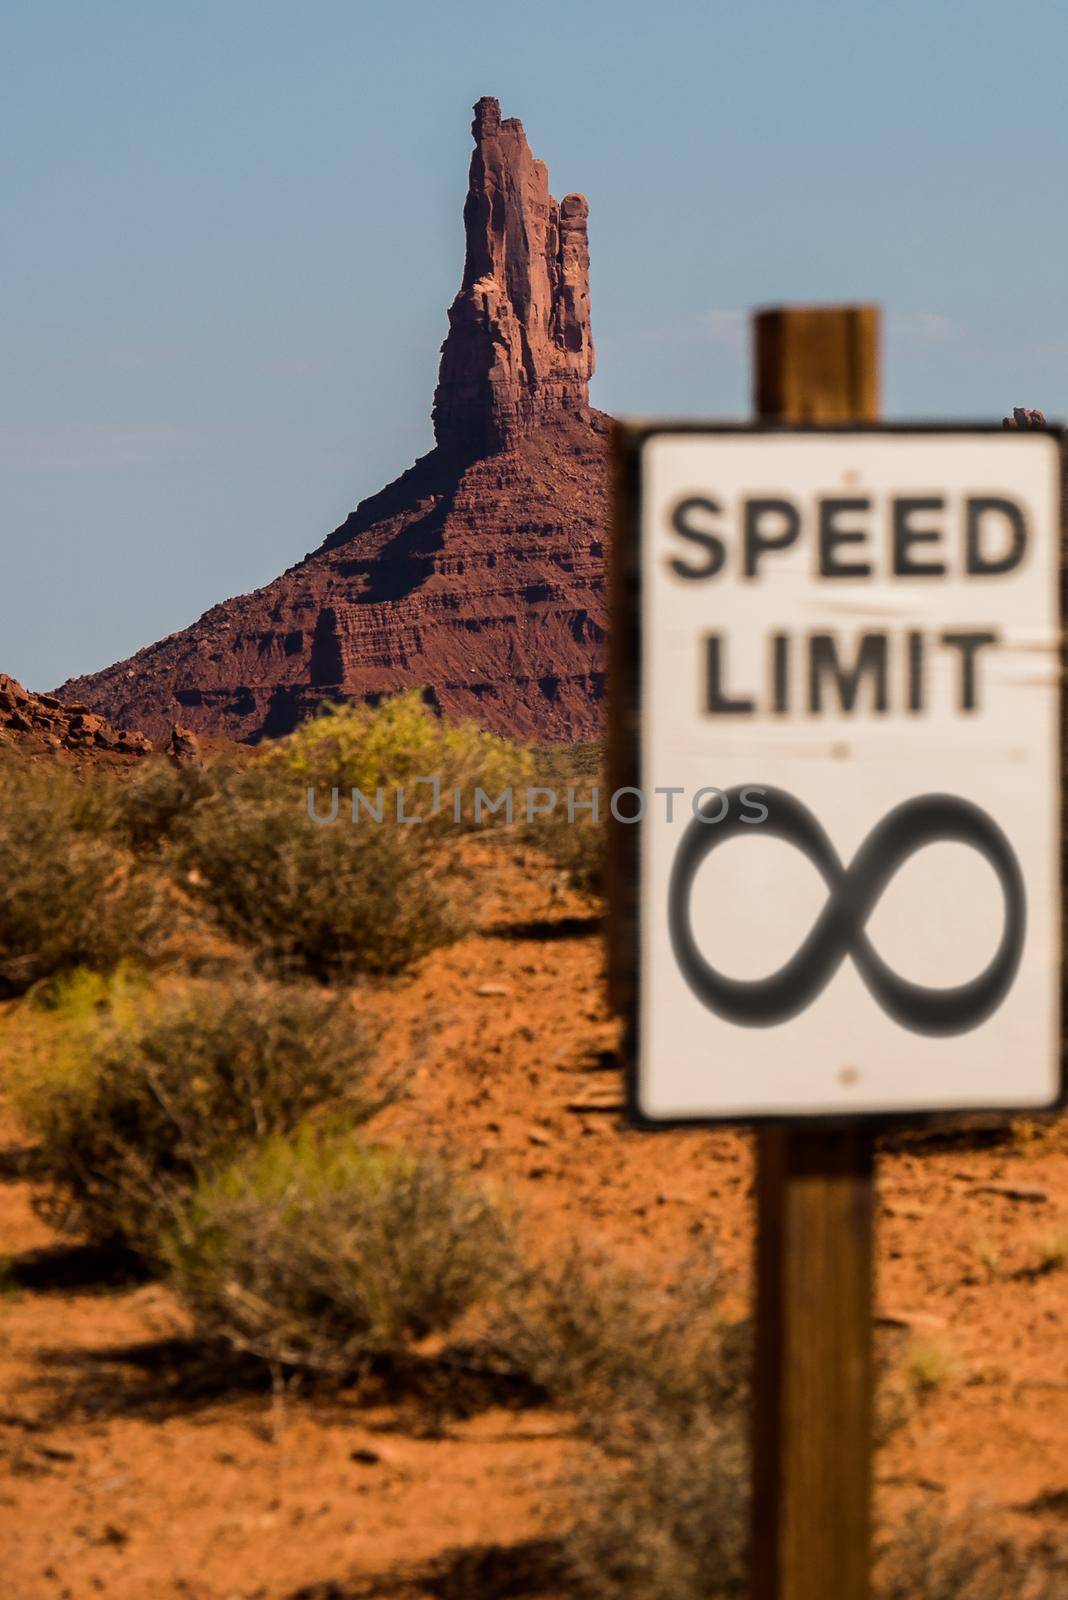 Infinity speed limit sign with mesa in the background by jyurinko